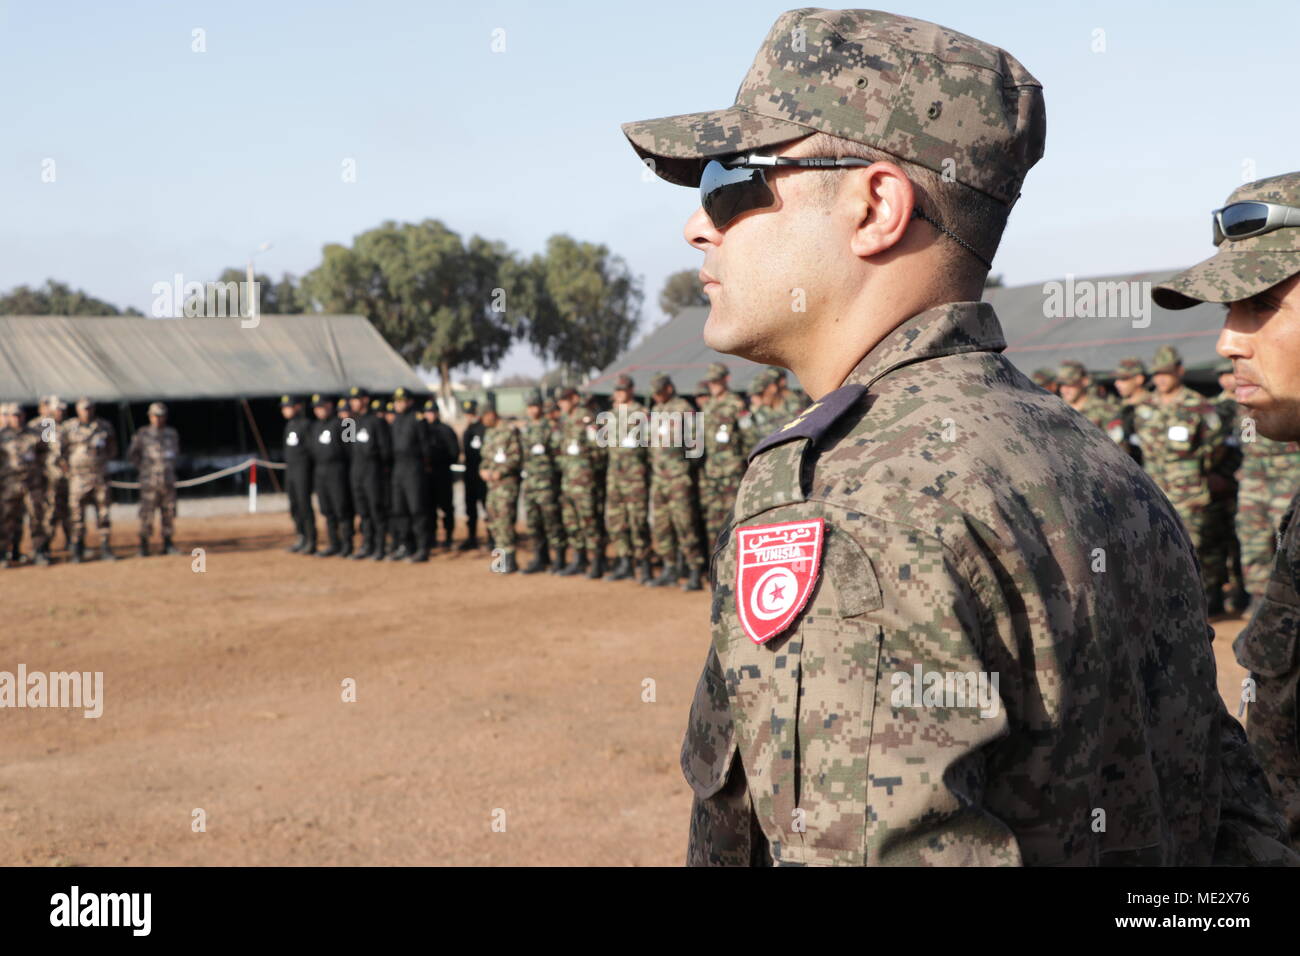 a-tunisian-soldier-stands-in-formation-during-the-opening-ceremony-of-exercise-african-lion-18-april-16-2018-tifnit-morocco-units-from-the-us-marine-corps-us-army-great-britain-and-tunisia-will-conduct-a-multi-lateral-field-training-exercise-with-units-from-the-royal-moroccan-armed-forces-focusing-on-counter-violent-extremist-organization-operations-special-focus-of-effort-will-be-placed-on-offensive-combat-operations-including-close-quarters-battle-training-limited-scale-demolitionsbreaching-operations-and-raid-operations-us-marine-corps-photo-by-1st-lt-brett-lazaroff-ME2X76.jpg